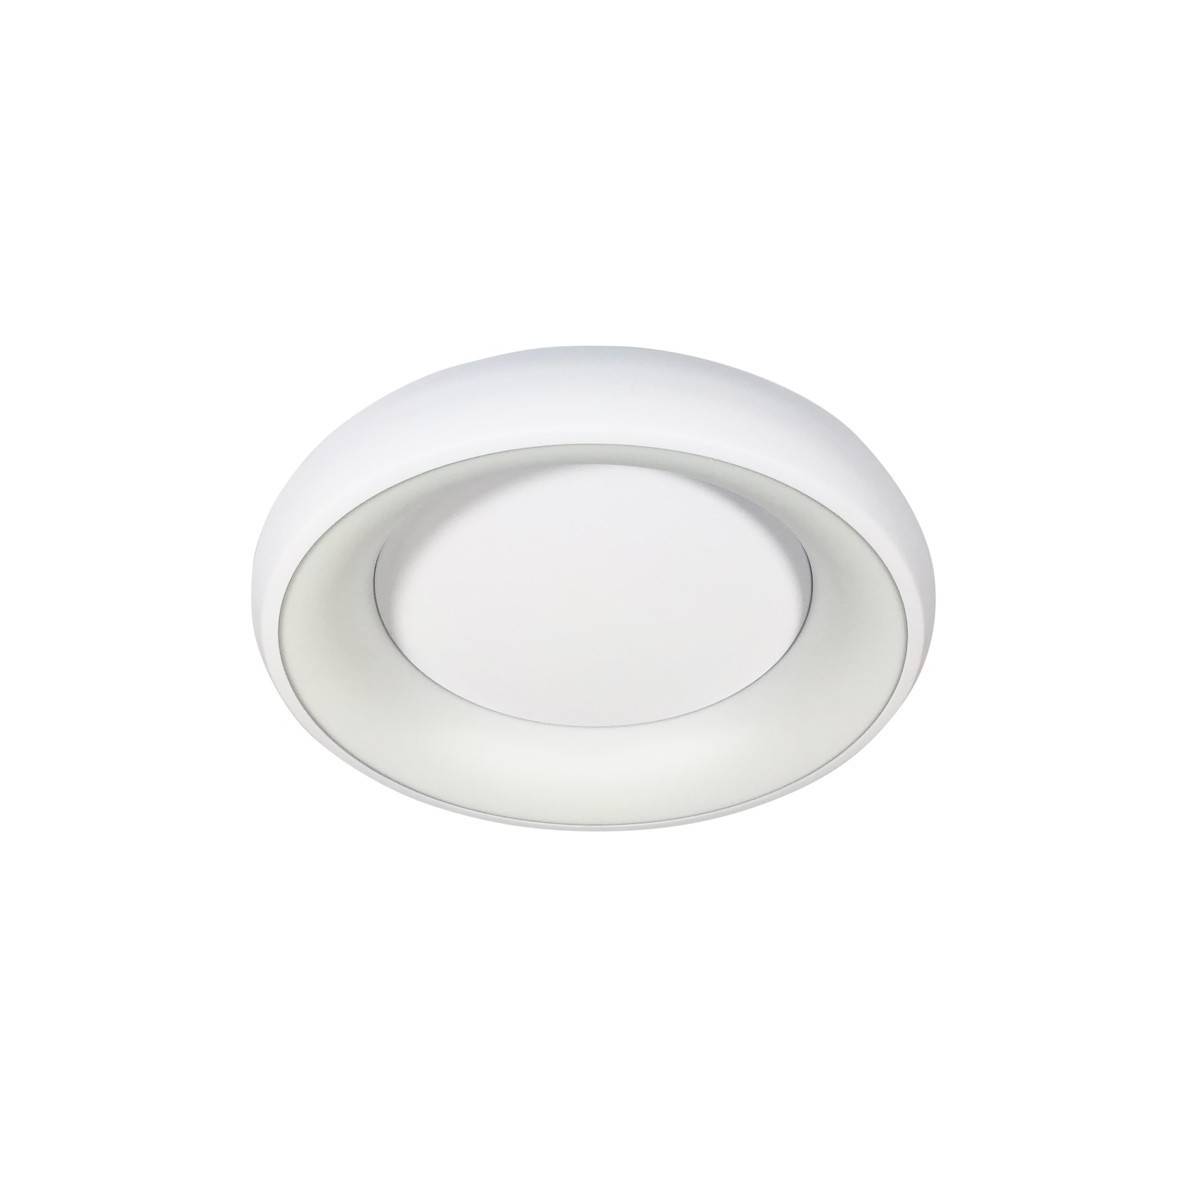 Ceiling LED lamp "DIAL" 21W